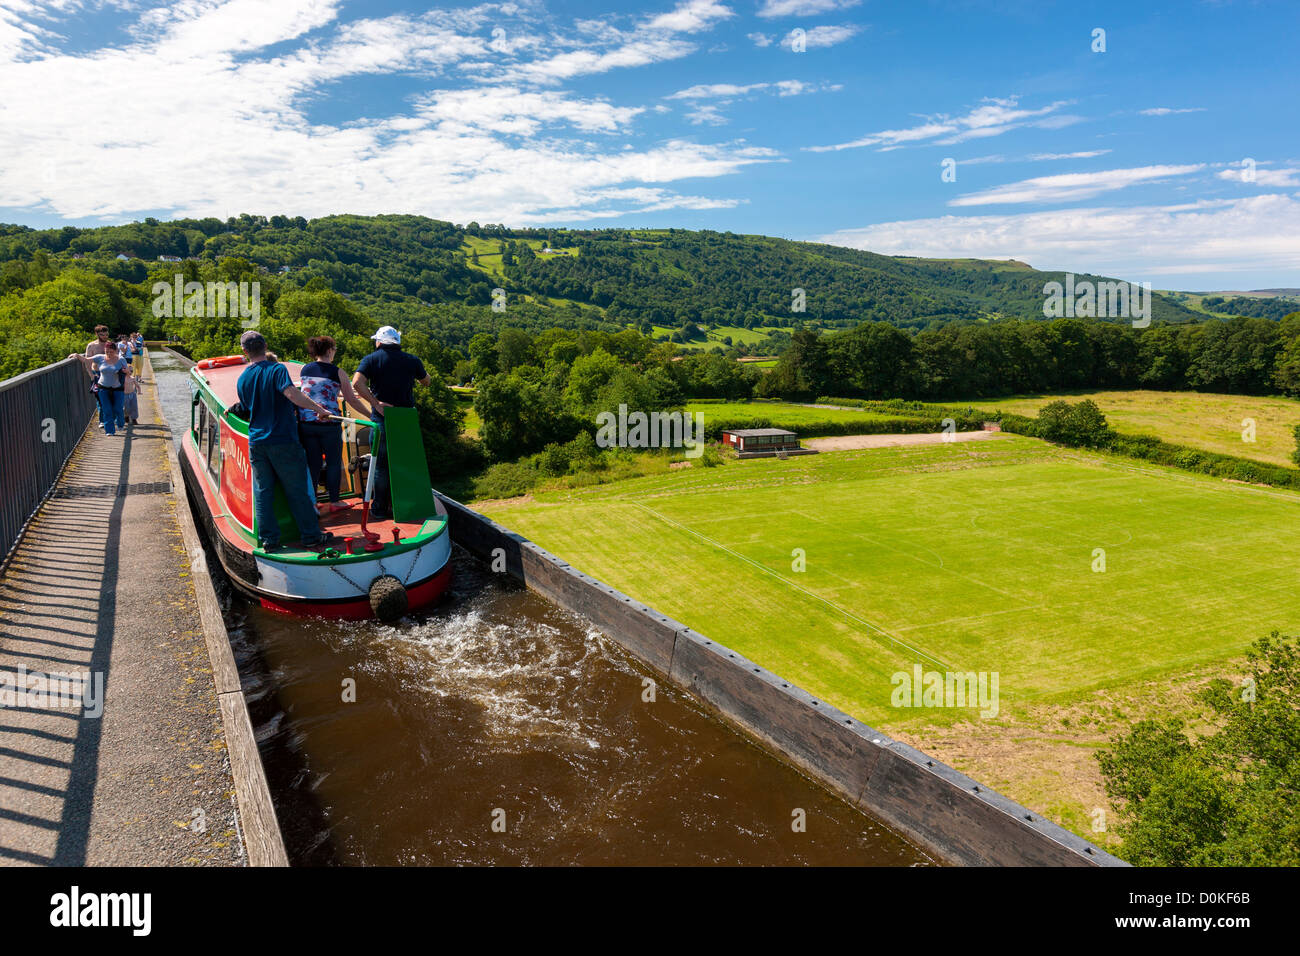 A barge travelling along the Pontcysyllte aquaduct which is a navigable aqueduct that carries the Llangollen Canal over the vall Stock Photo